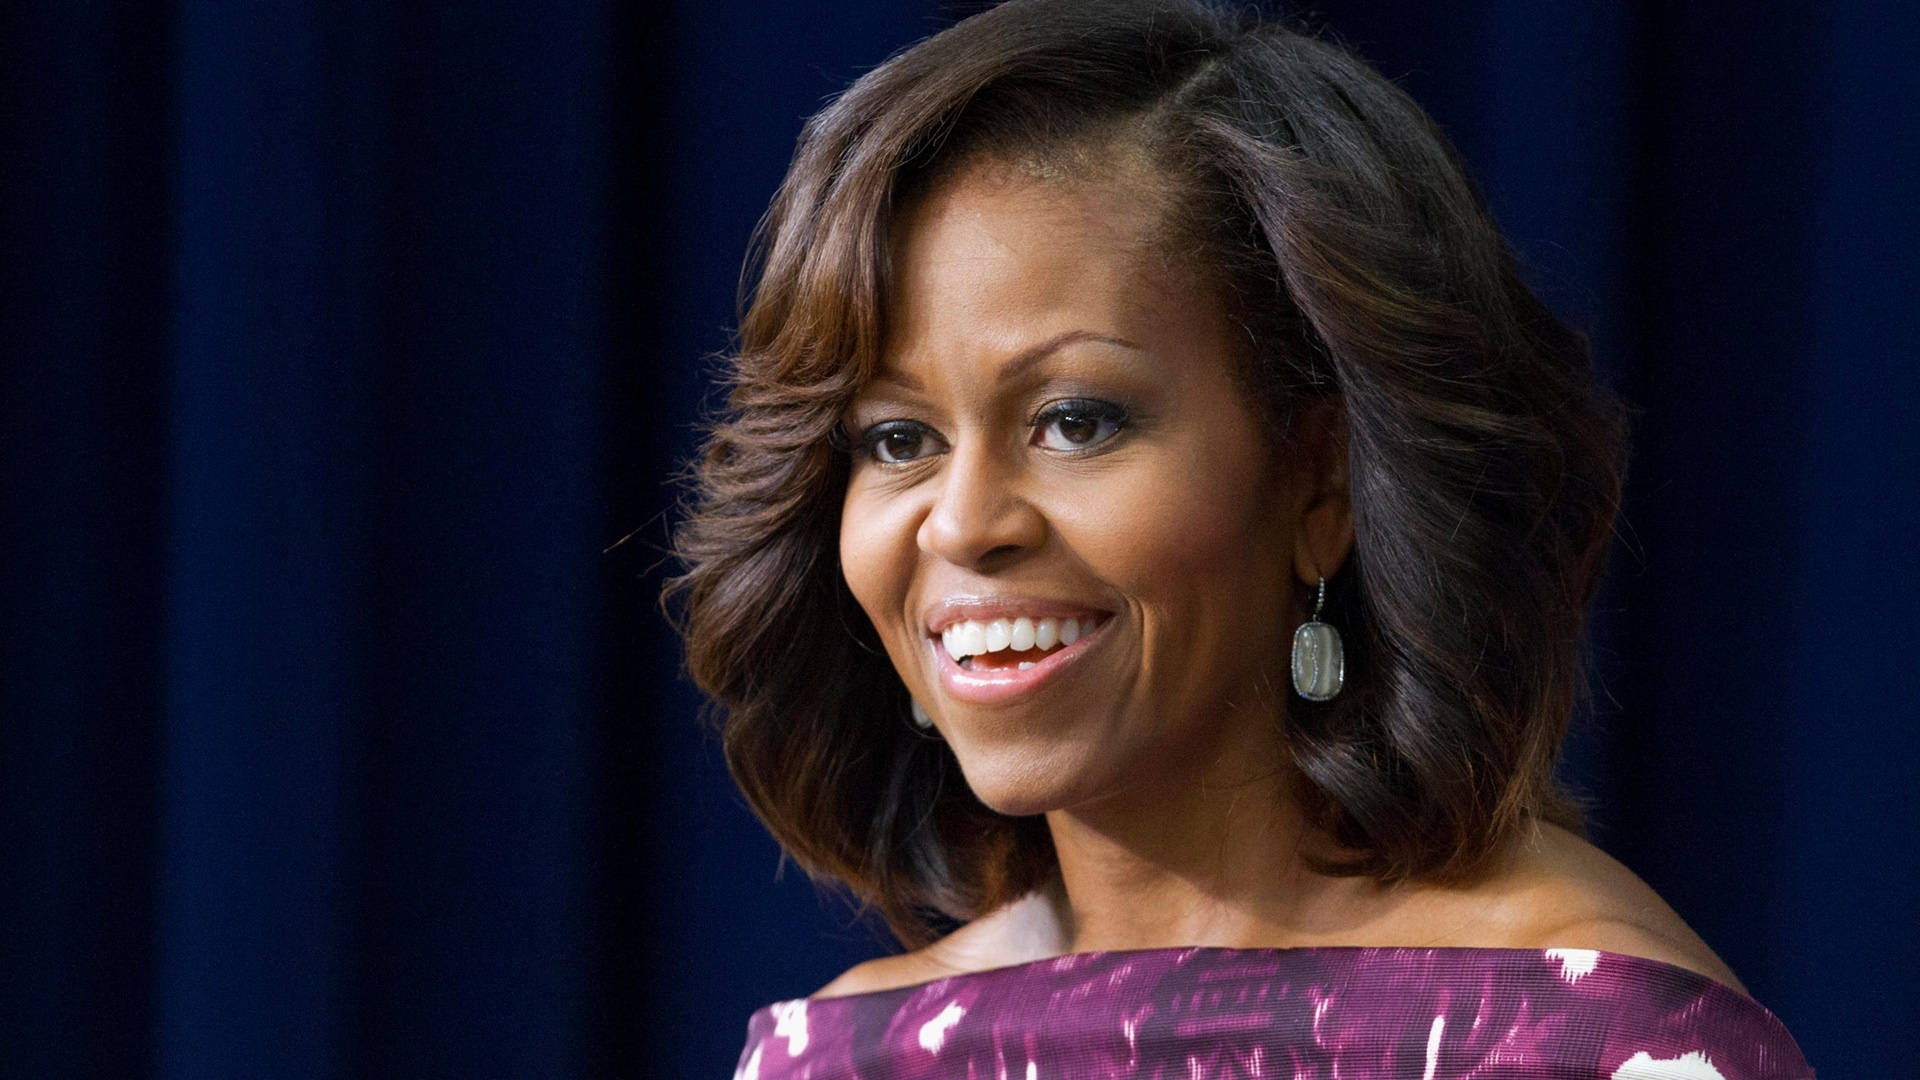 Michelle Obama: As first lady, she focused her attention on social issues such as poverty, healthy living and education. 1920x1080 Full HD Background.